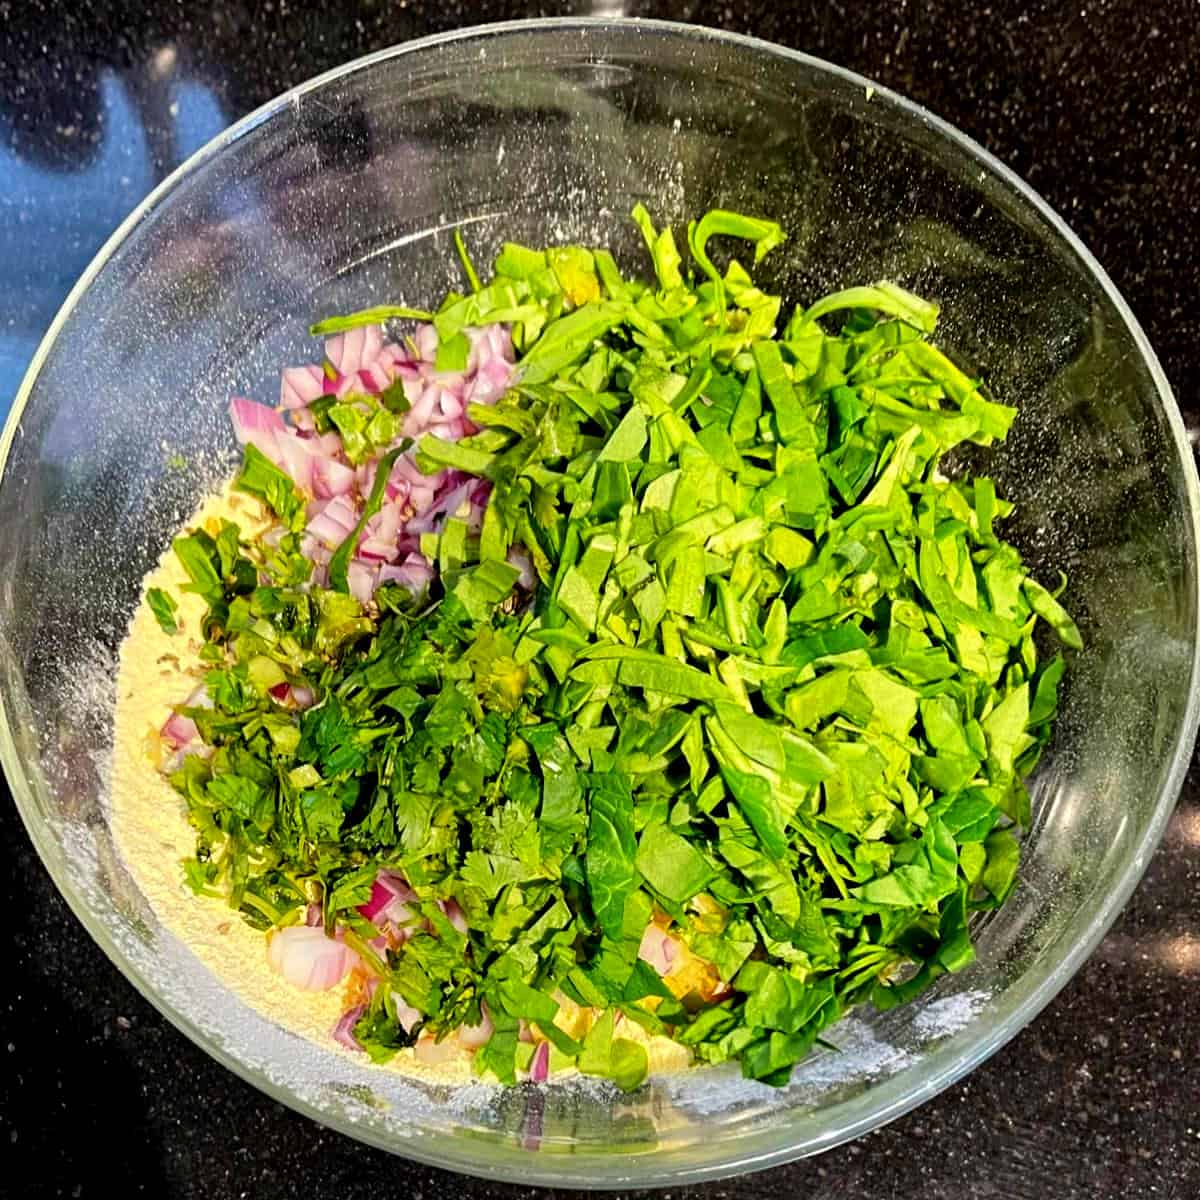 Spinach and cilantro added to besan chilla ingredients.